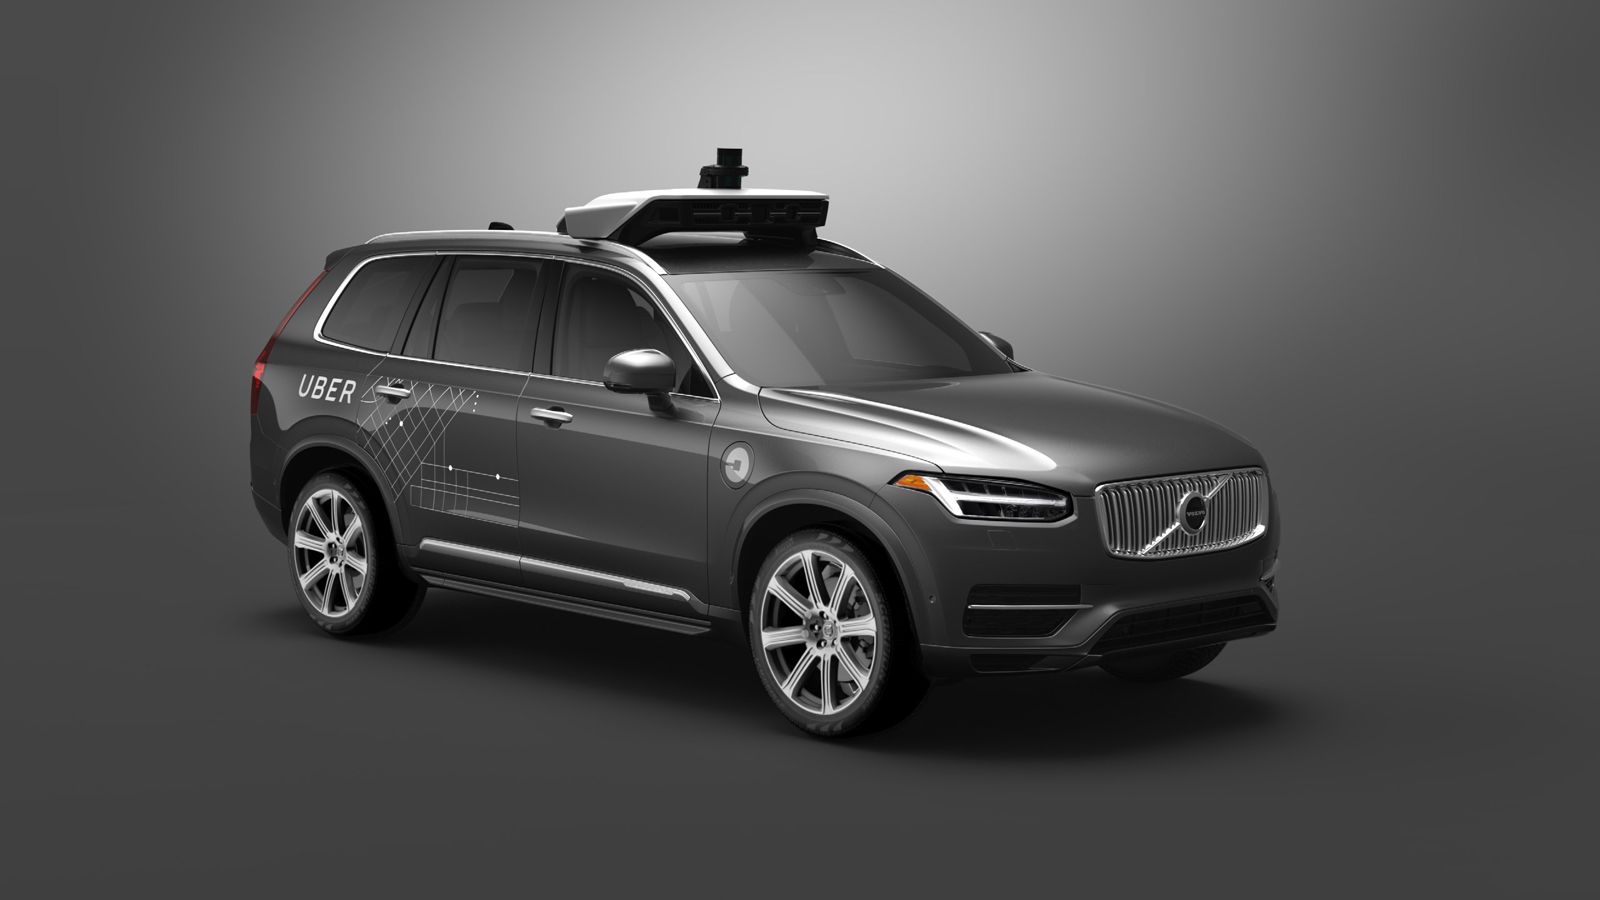 uber and volvo jointly working on autonomous taxis as test fleet arrives in pittsburgh image 1